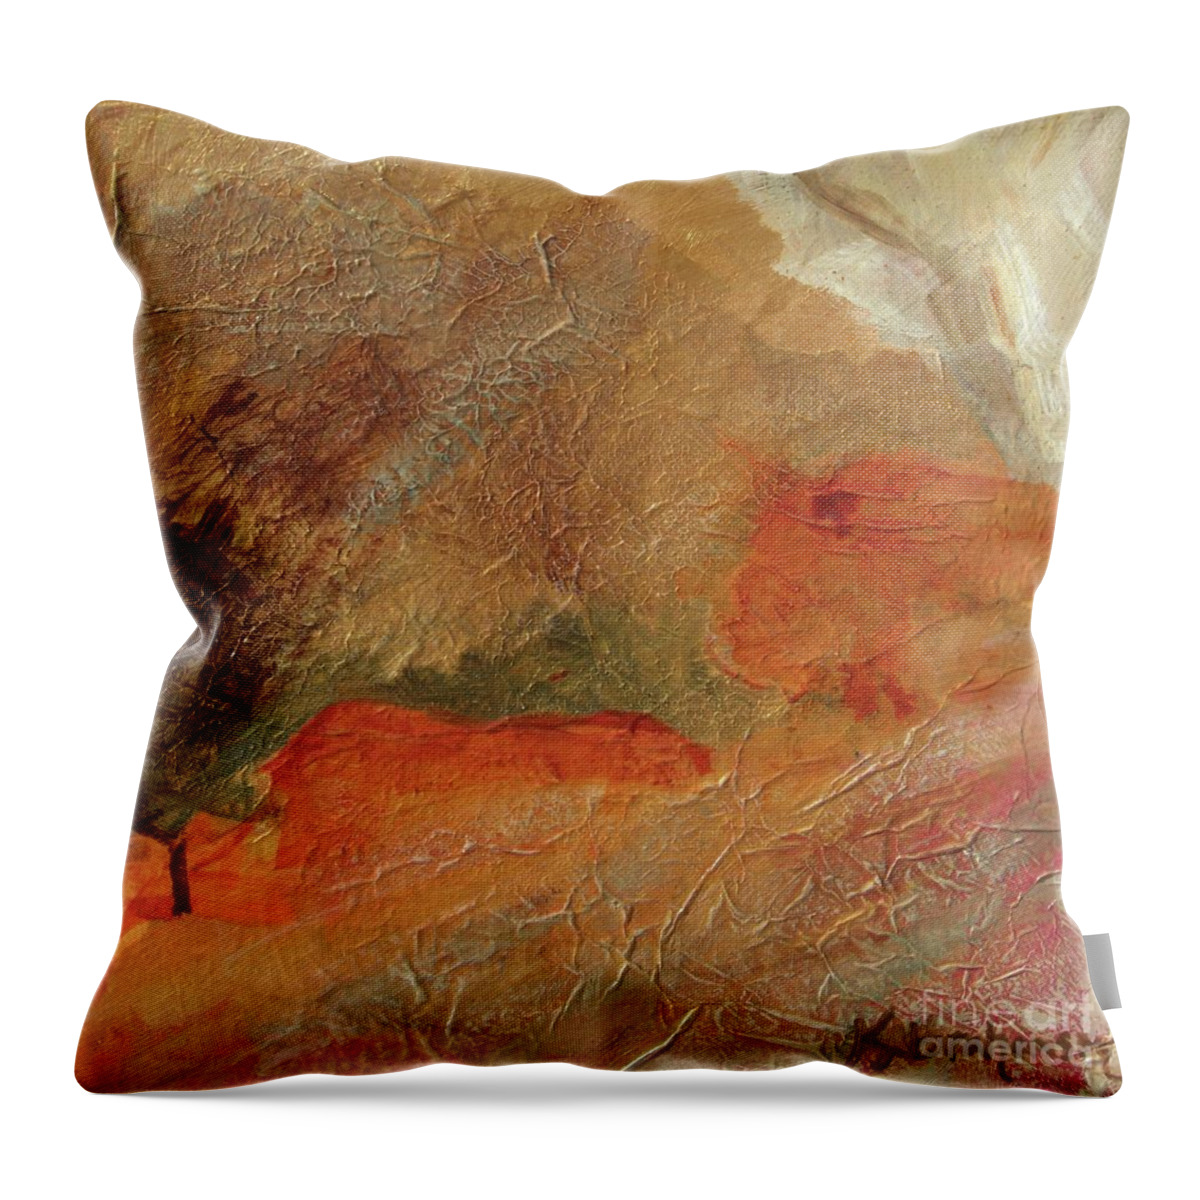 Textured Abstract Throw Pillow featuring the painting Golden Amber by Kristen Abrahamson